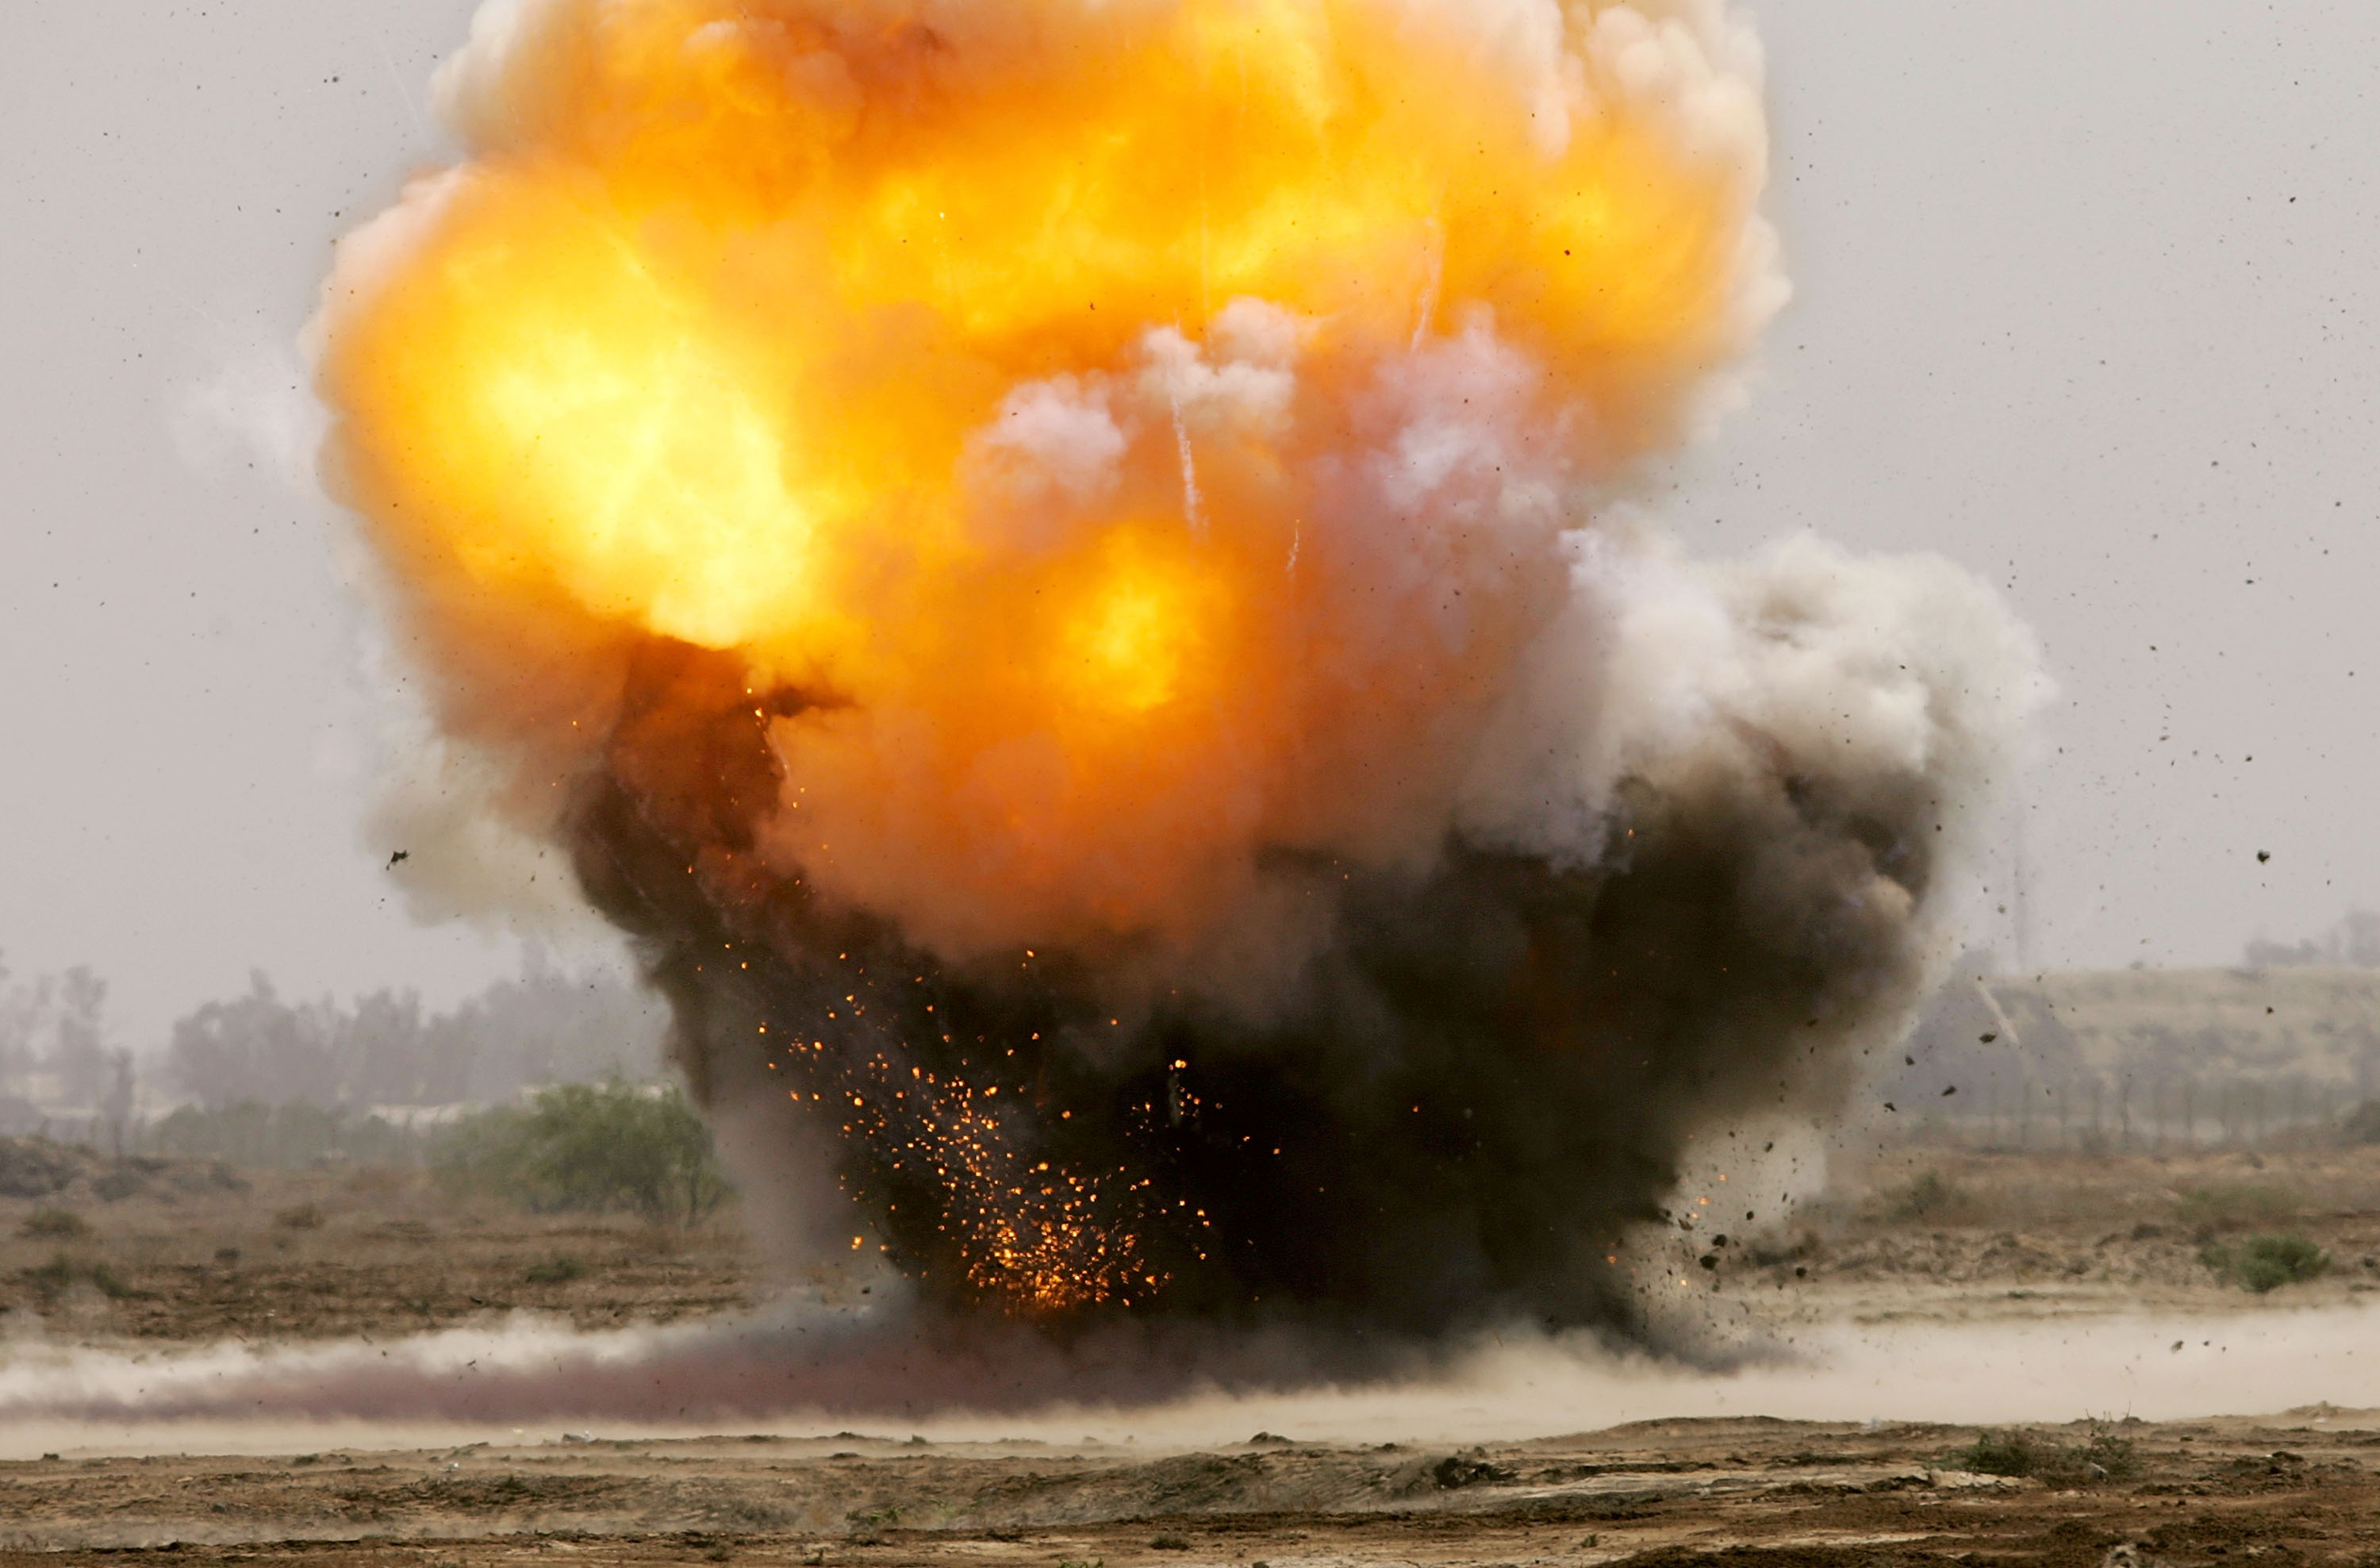 Captured explosives used in roadside bombs are detonated by an Army bomb-disposal unit in Baghdad in 2005. (John Moore / Getty Images)